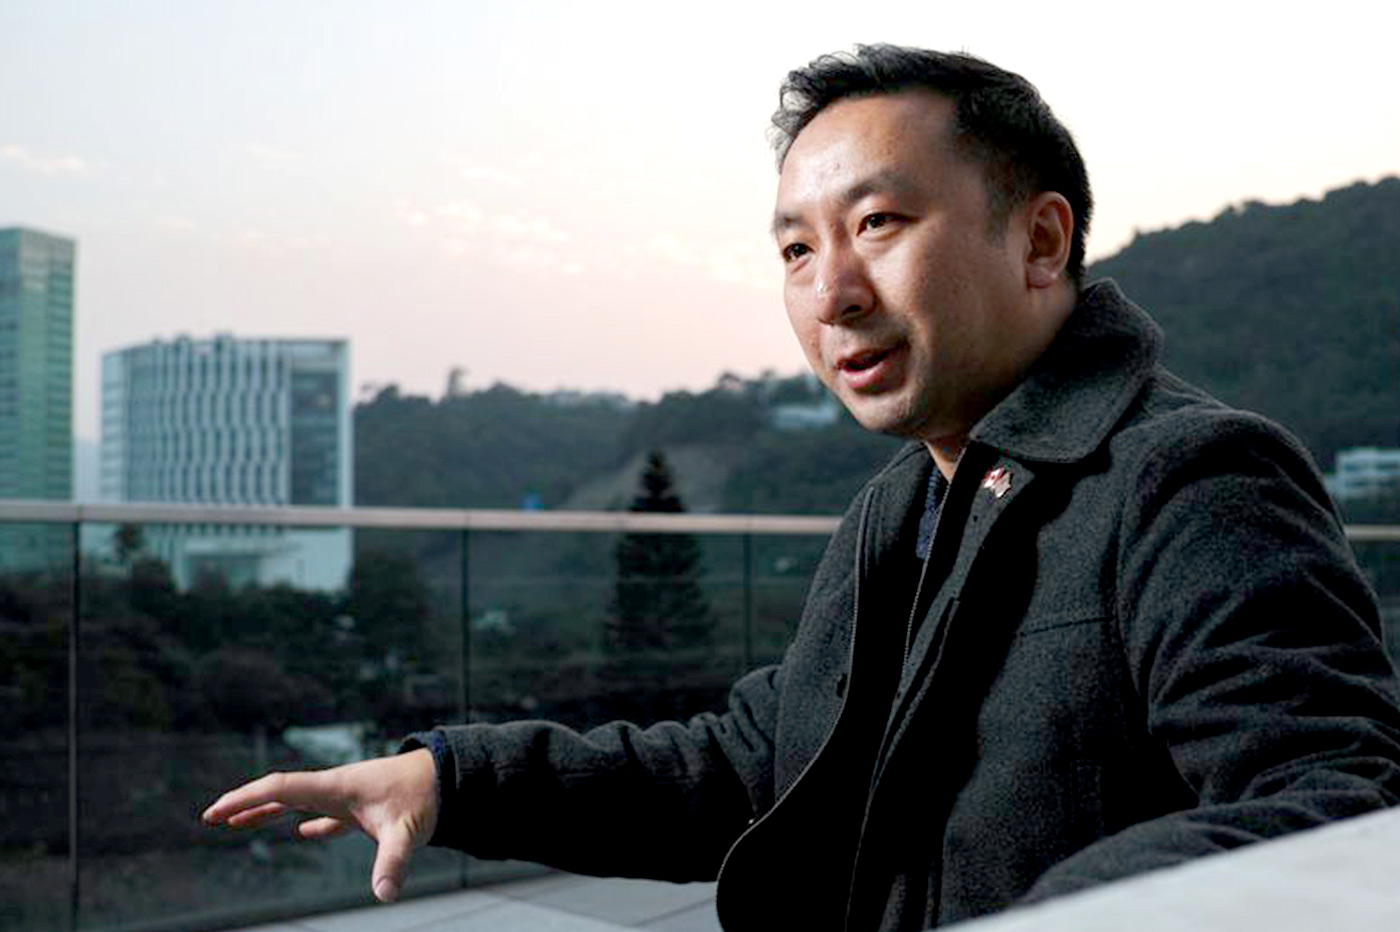 Cantonese lecturer Raymond Pai is an alumnus of Biology at CUHK <em>(Photo by Keith Hiro)</em>